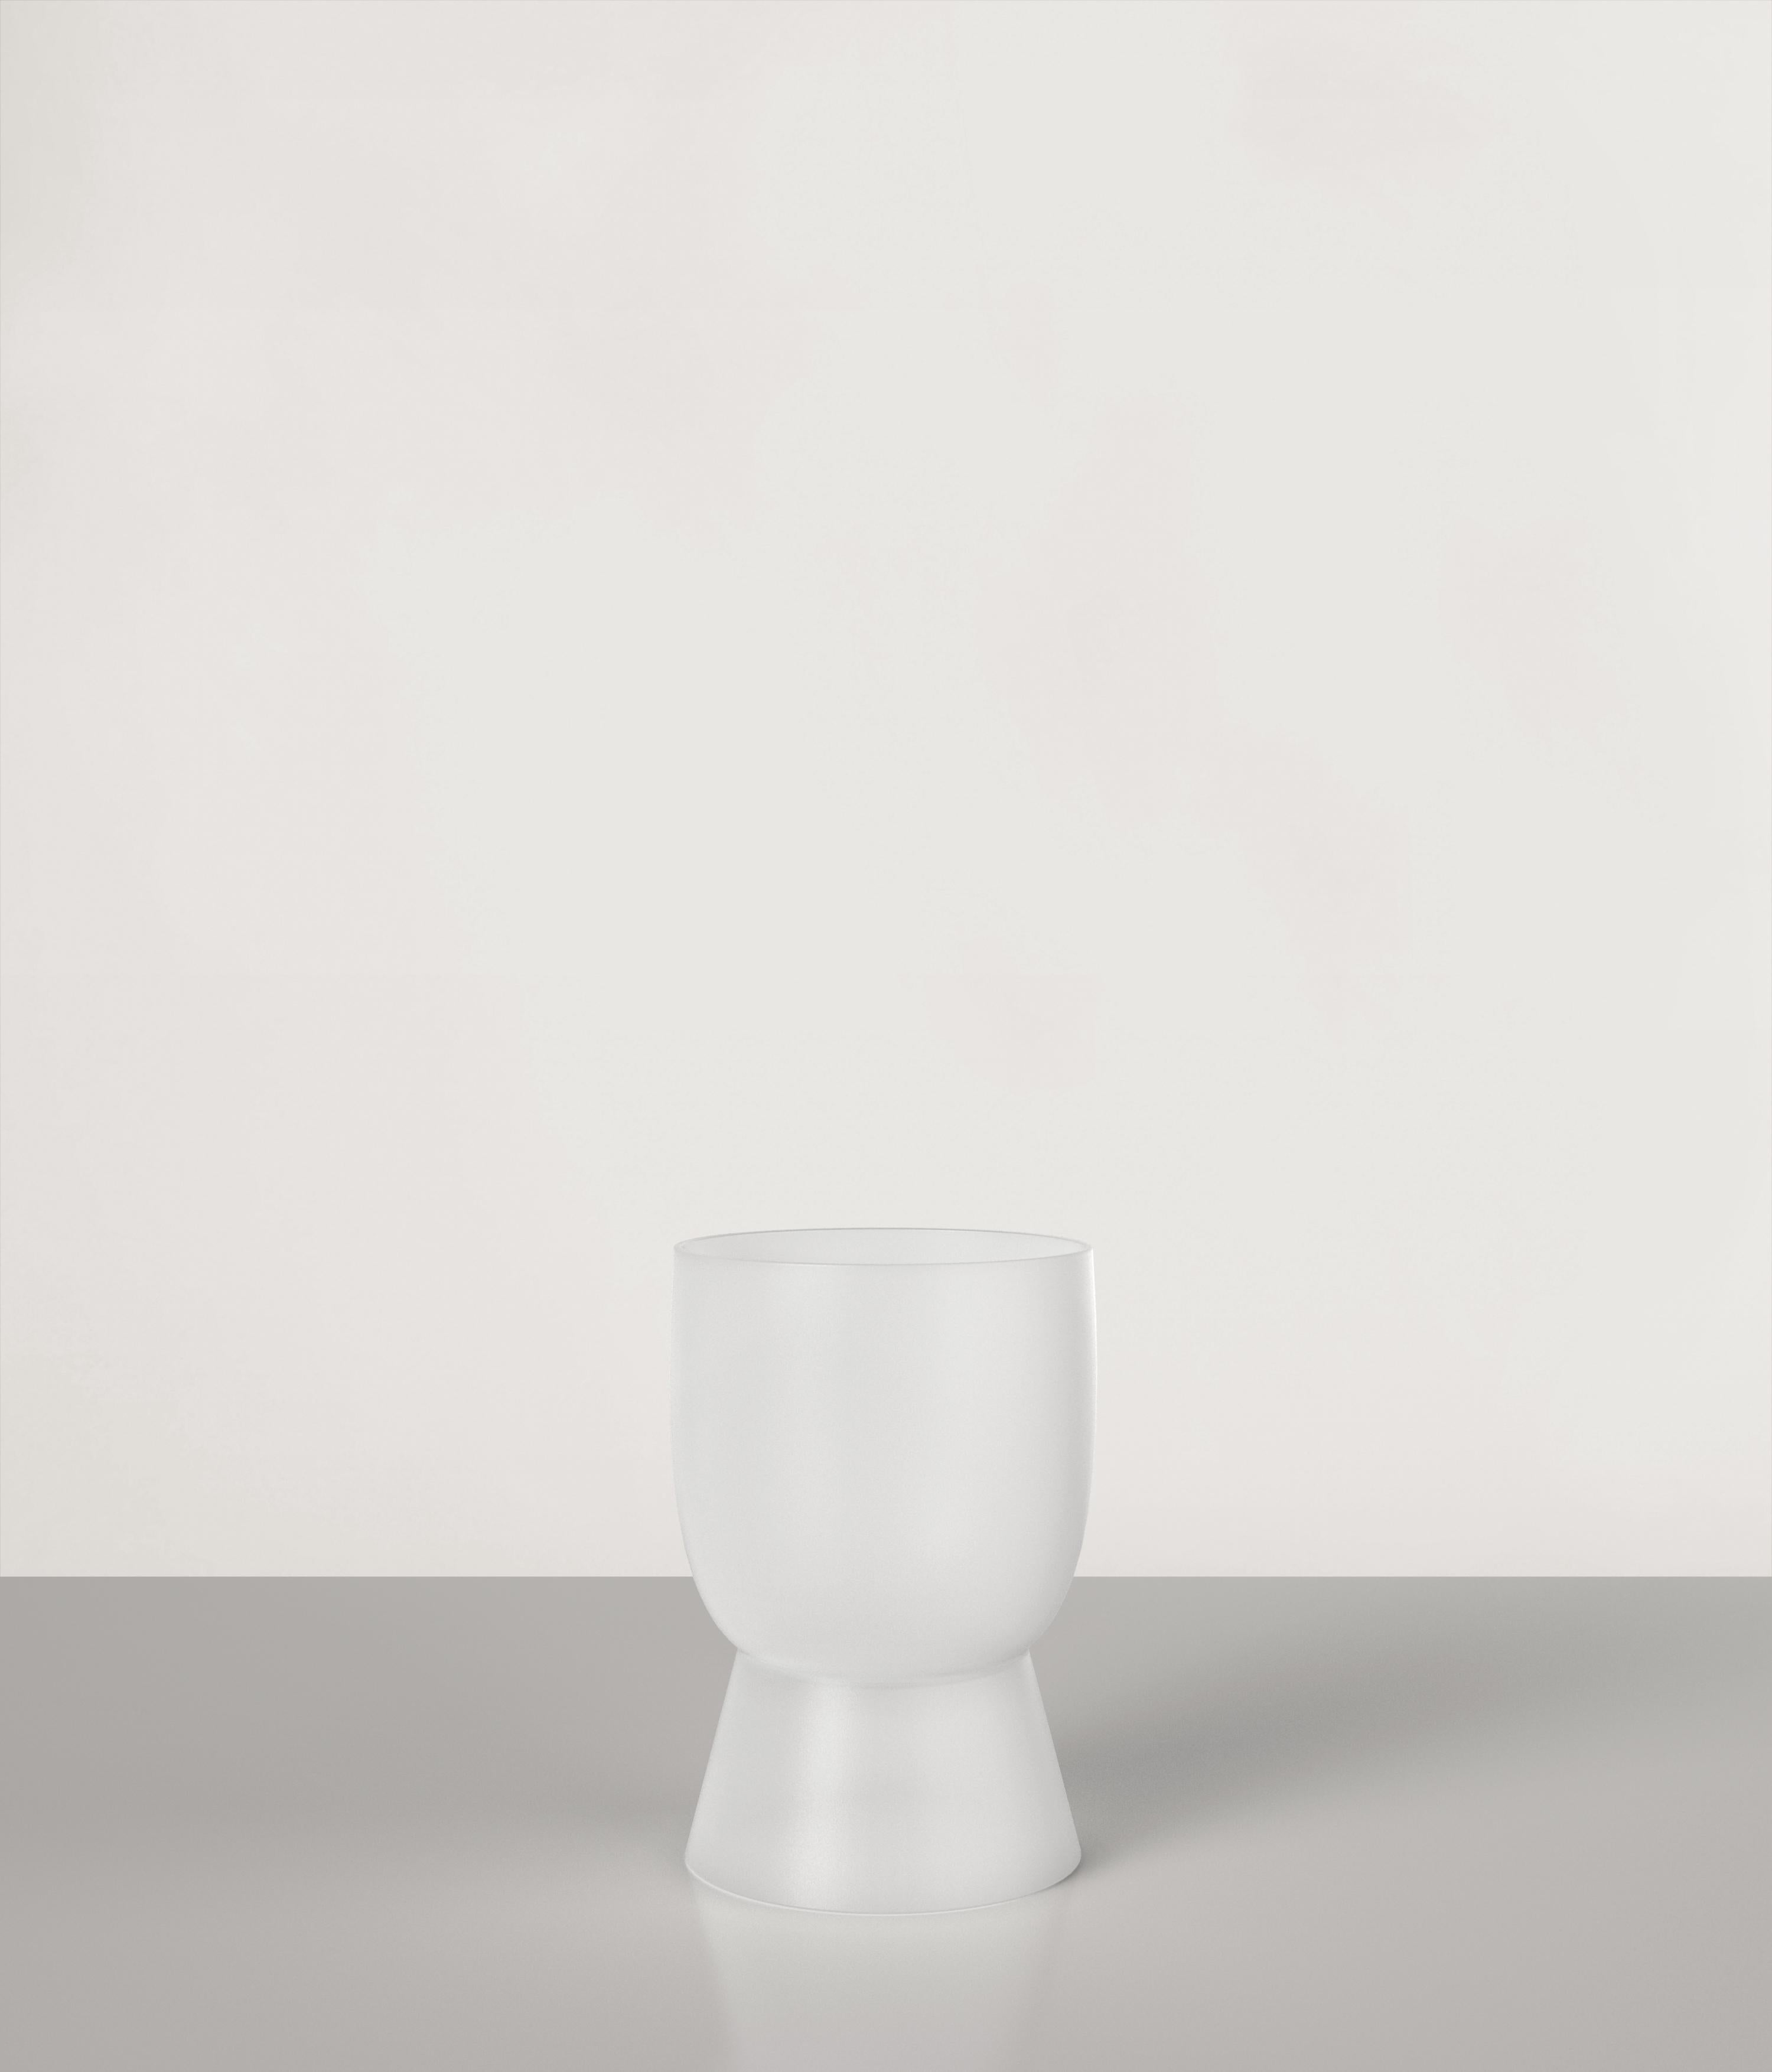 Pigalle V1 is a 21st Century glass made by Italian artisans in blown sanded glass. The piece is manufactured in a limited edition of 1000 signed and progressively numbered examples. It is part of the collectible design language Pigalle that has been